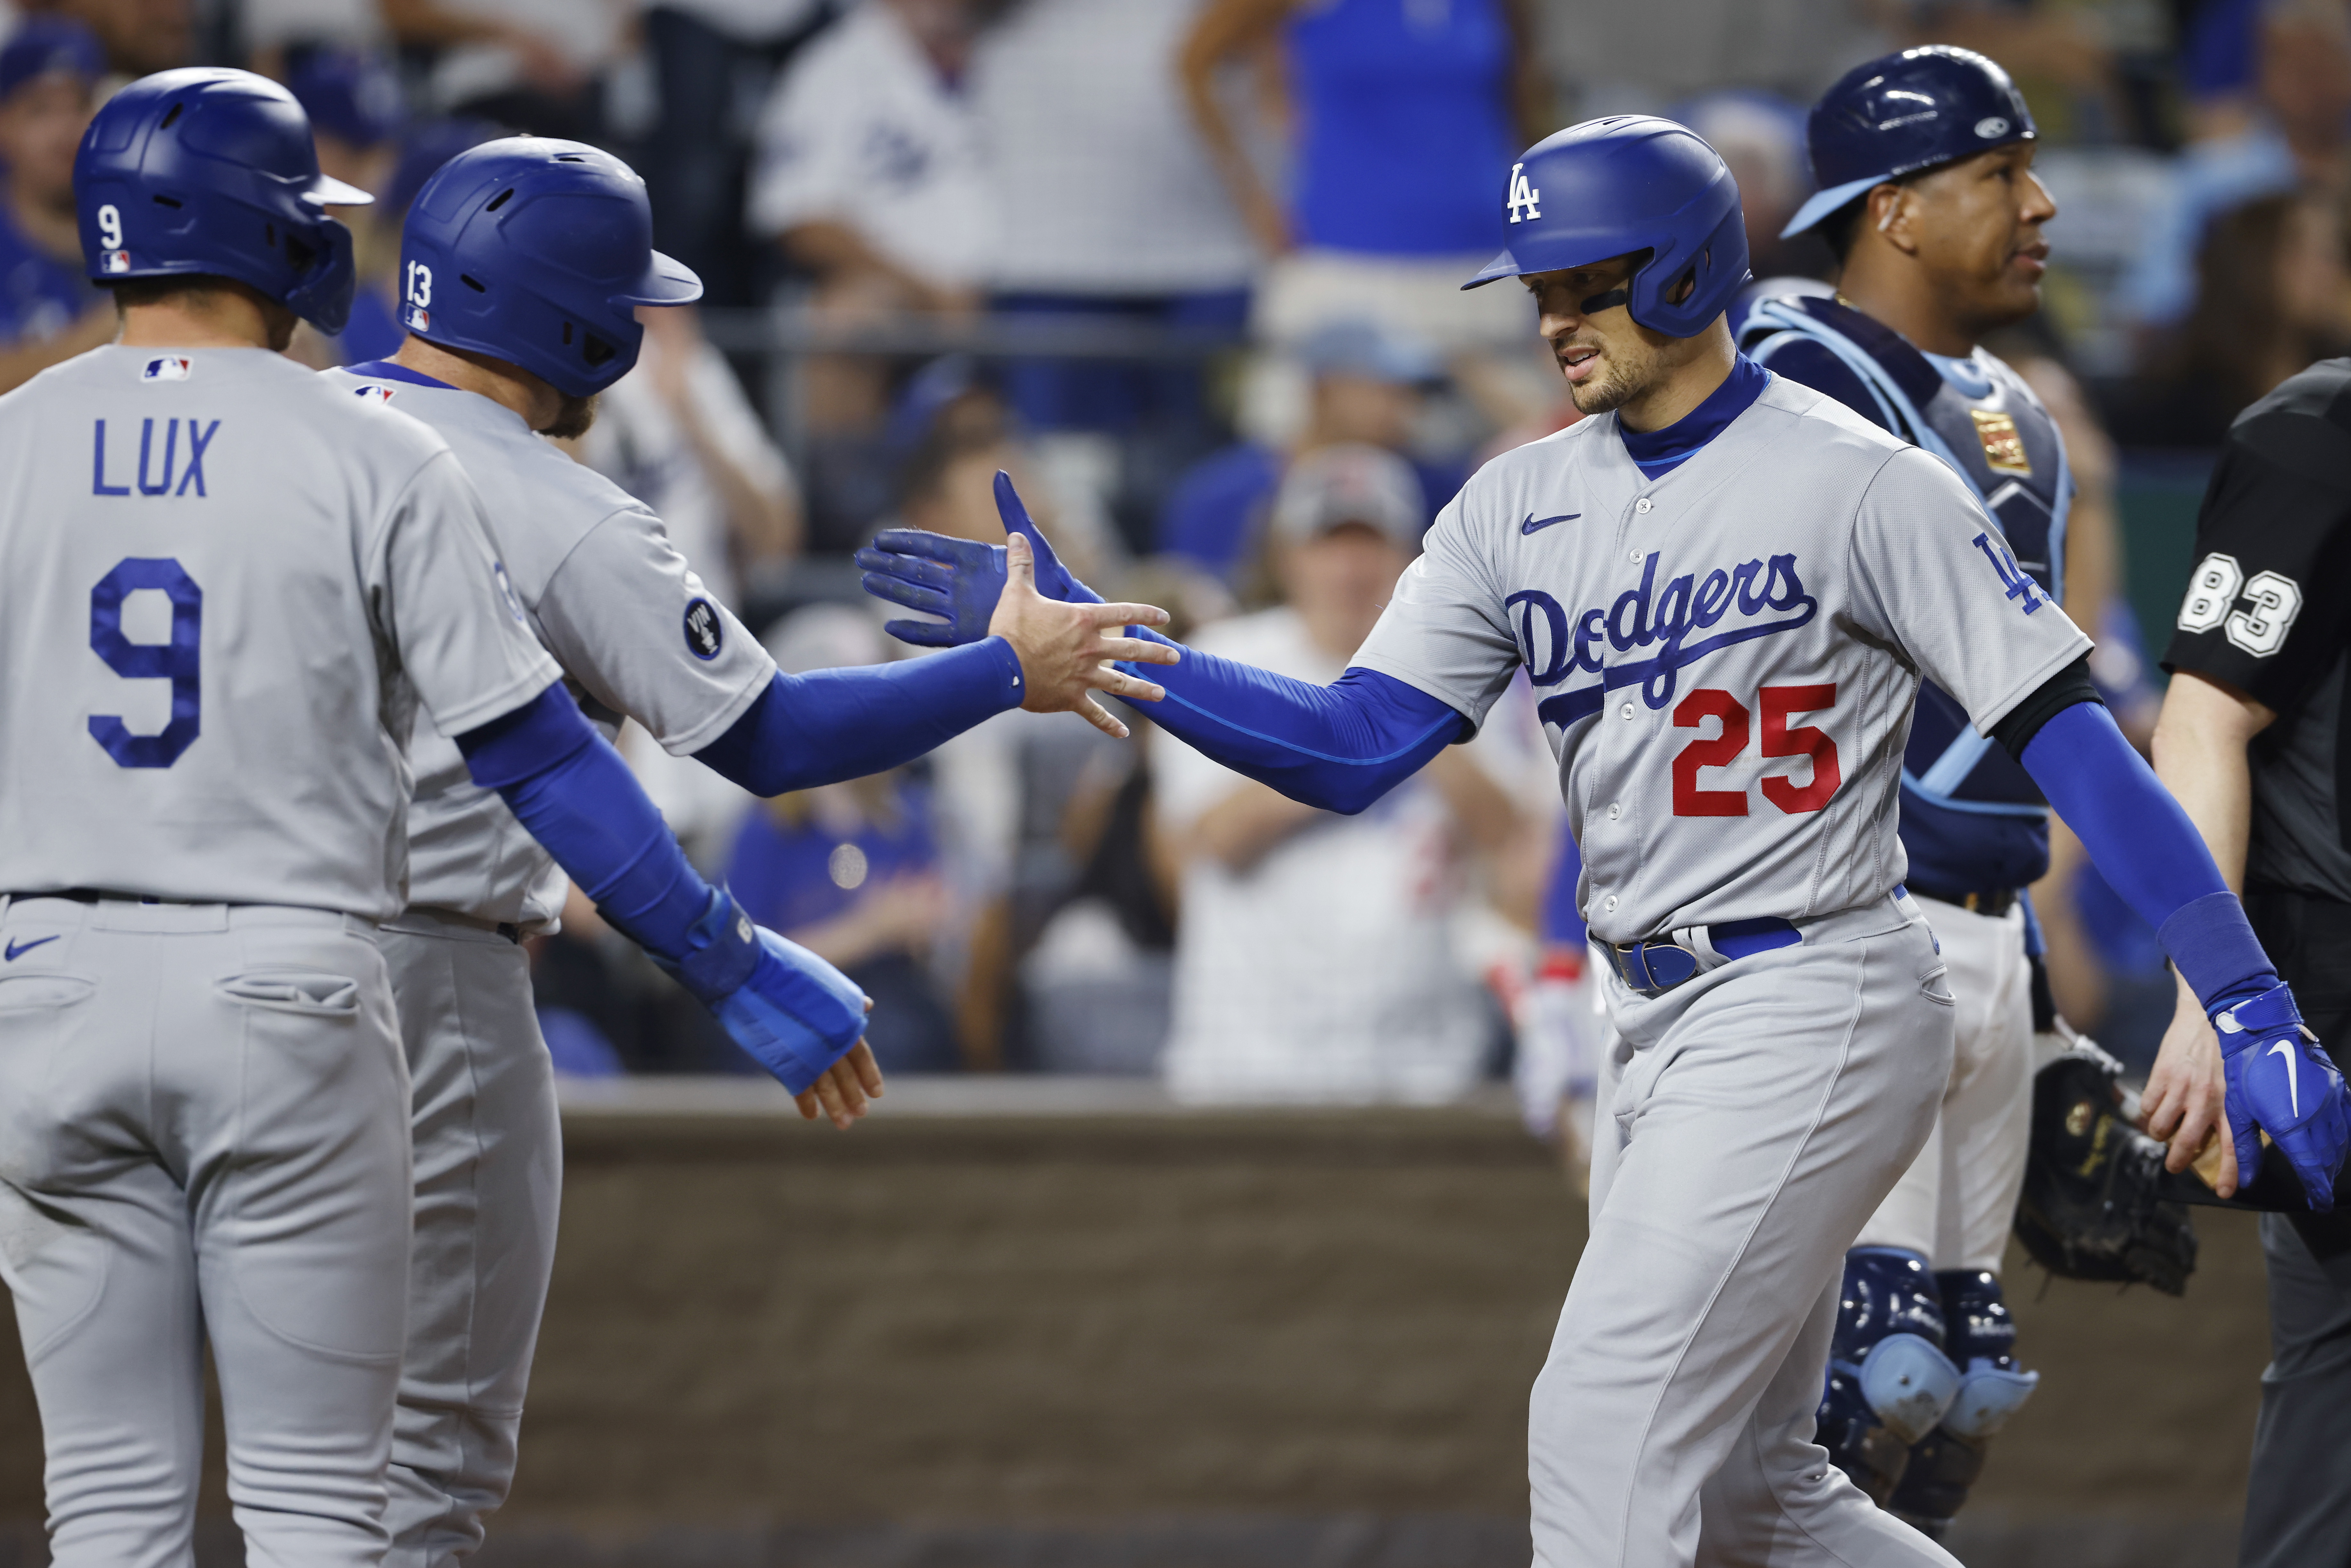 tony gonsolin flirts with perfection as dodgers turn winning streak up to 11